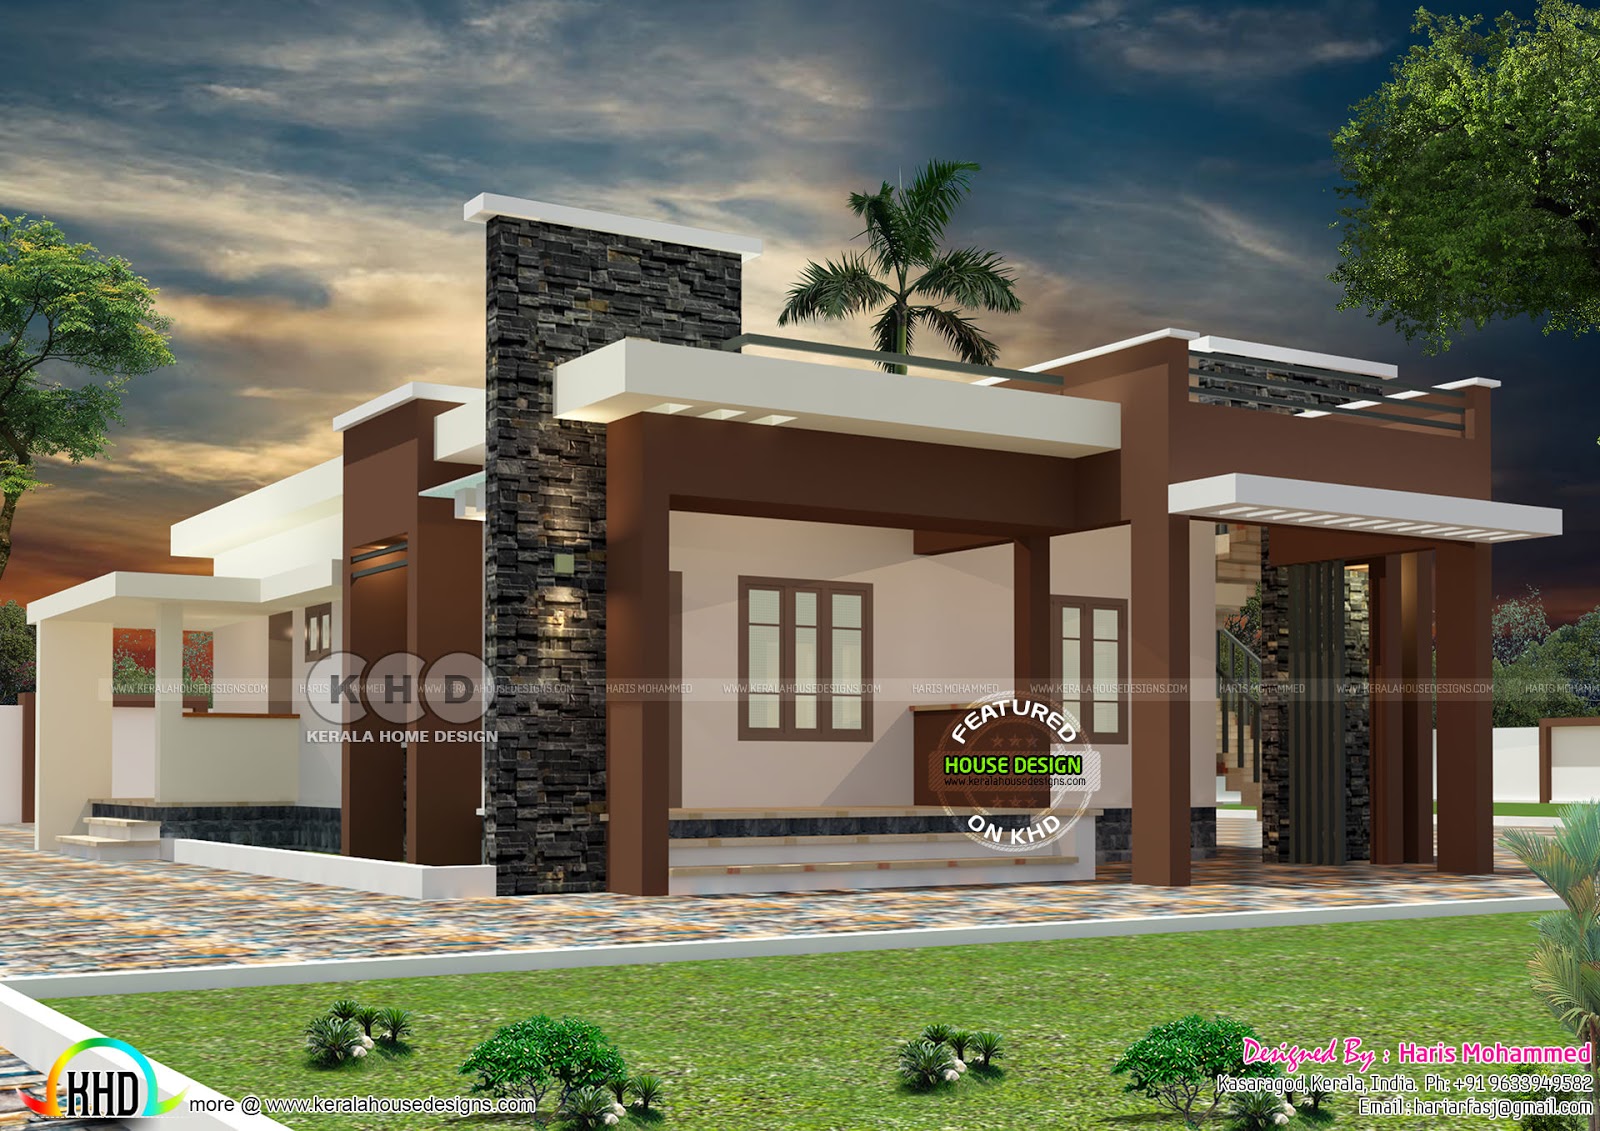 1113 Square Feet 12 Lakhs Cost Estimated Home Kerala Home Design And Floor Plans